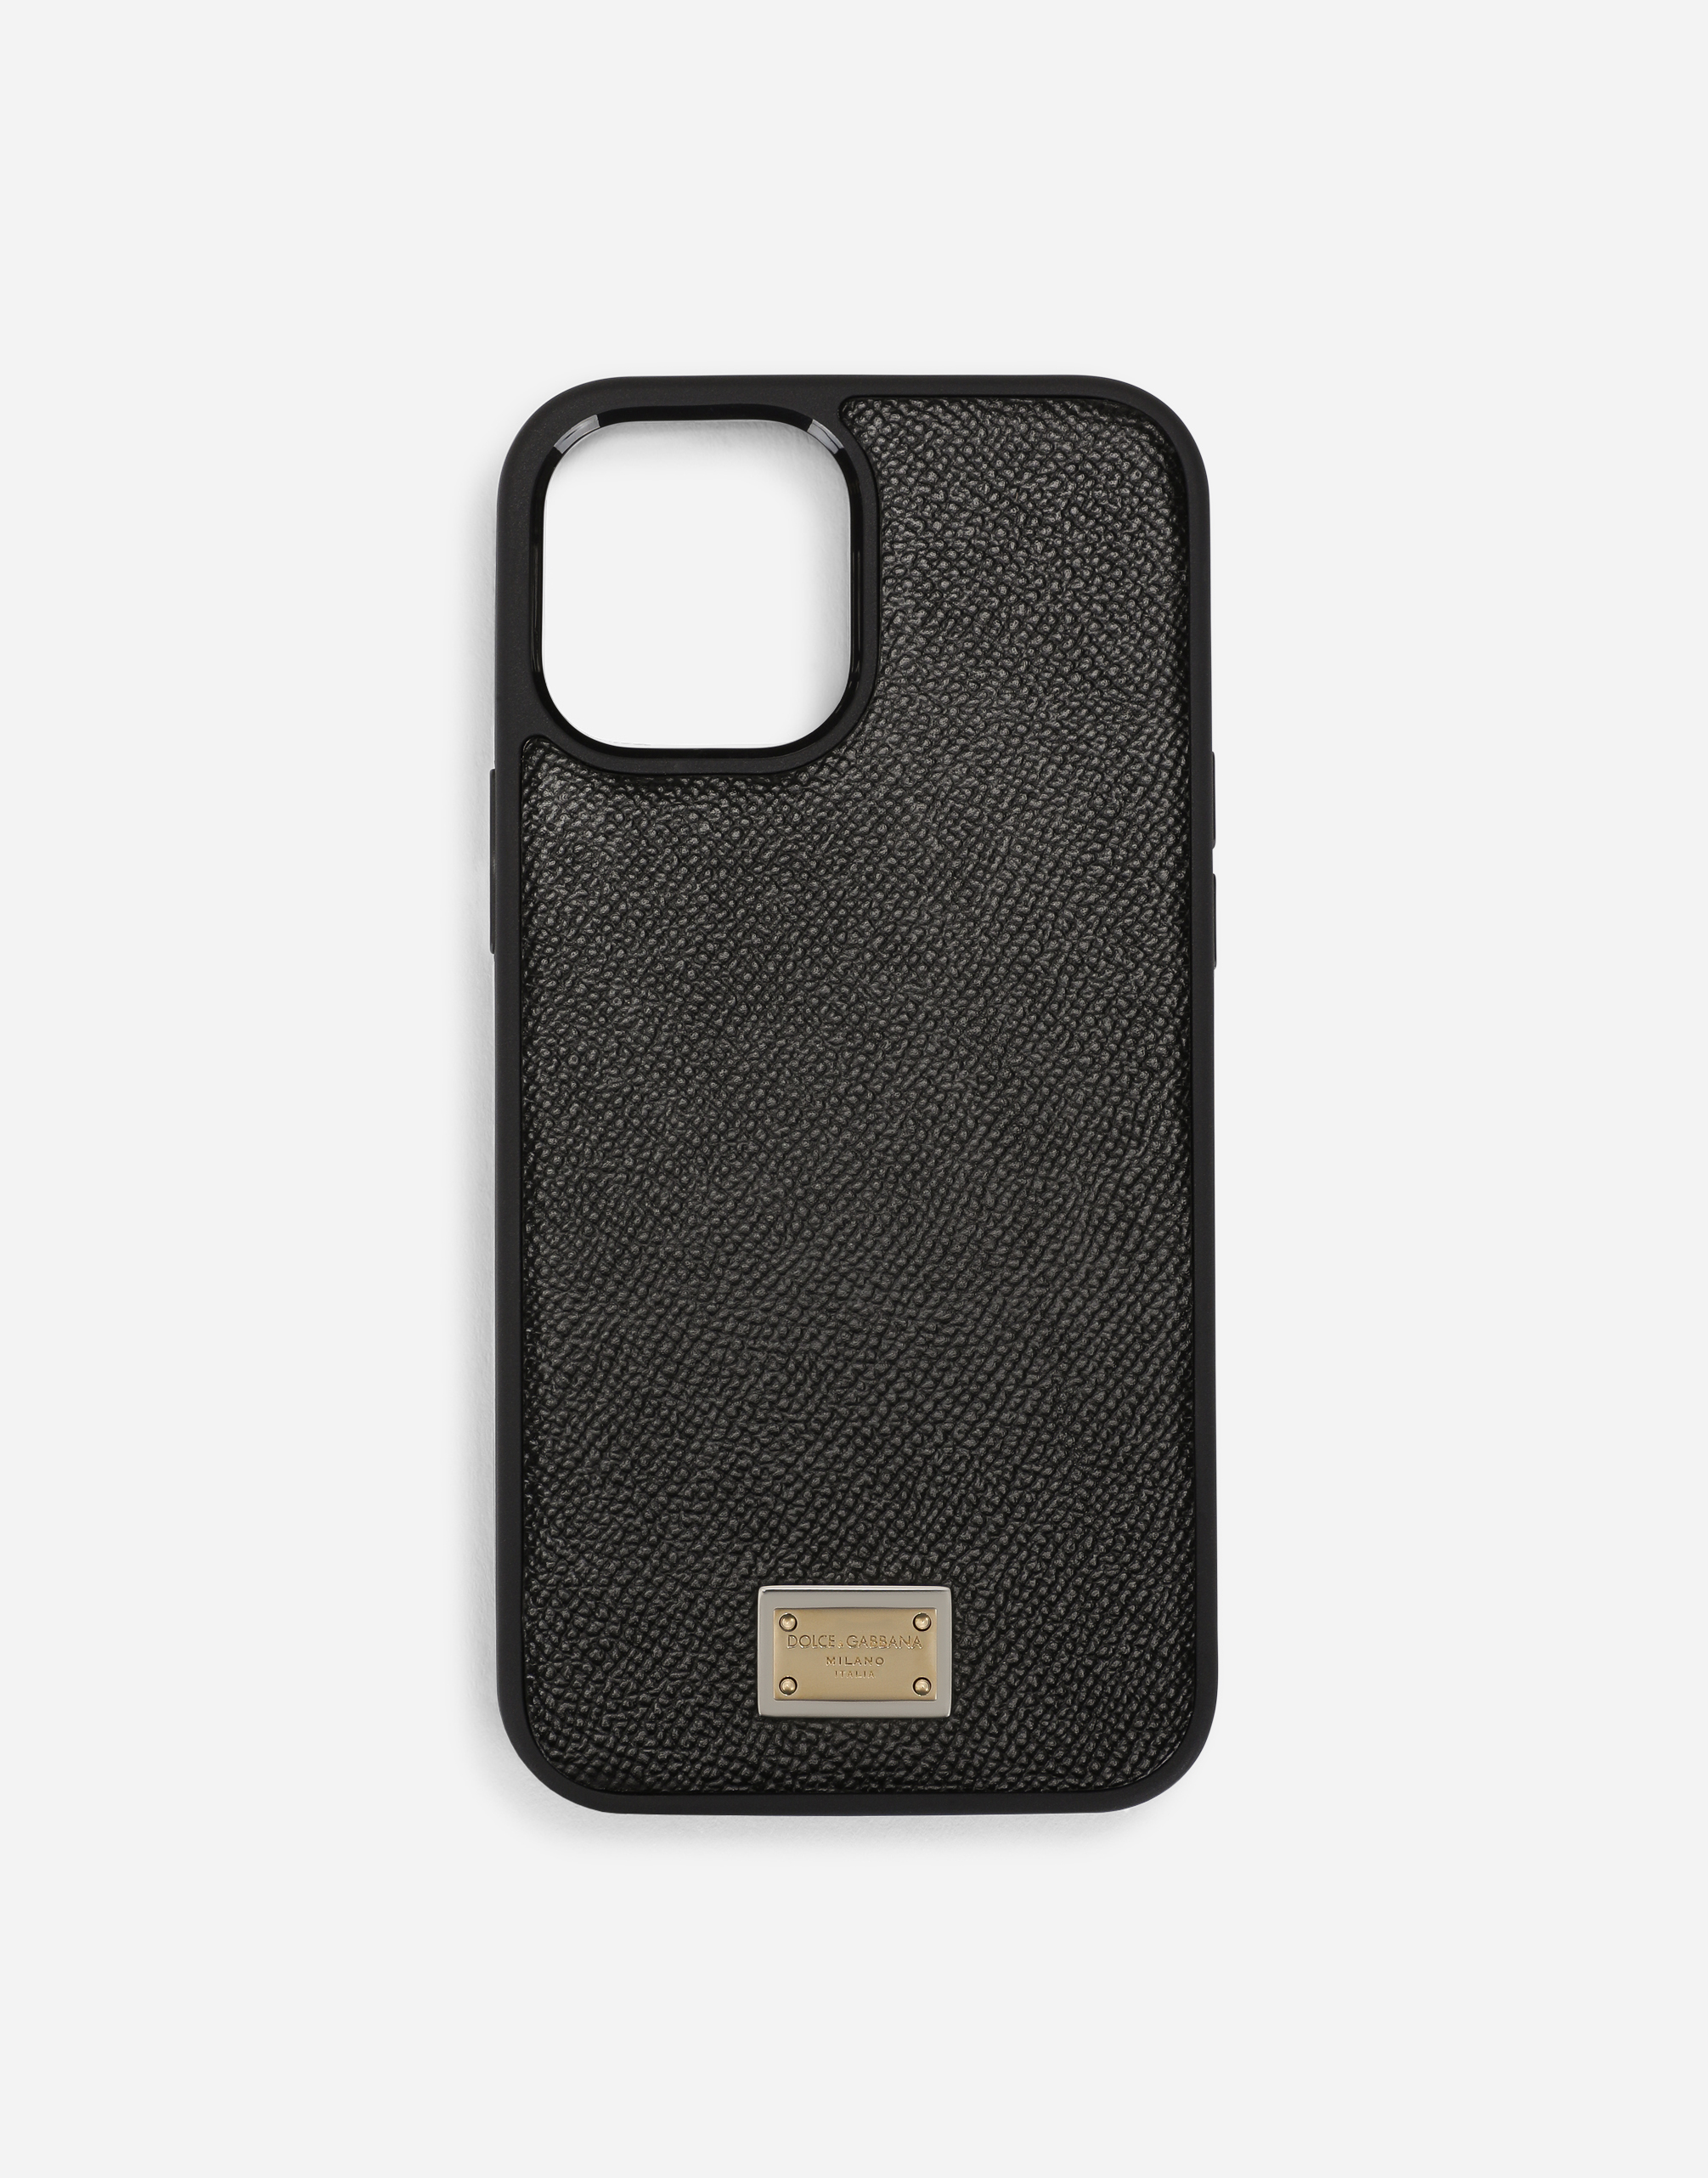 Dauphine calfskin iPhone 12 Pro Max cover with plate in Black